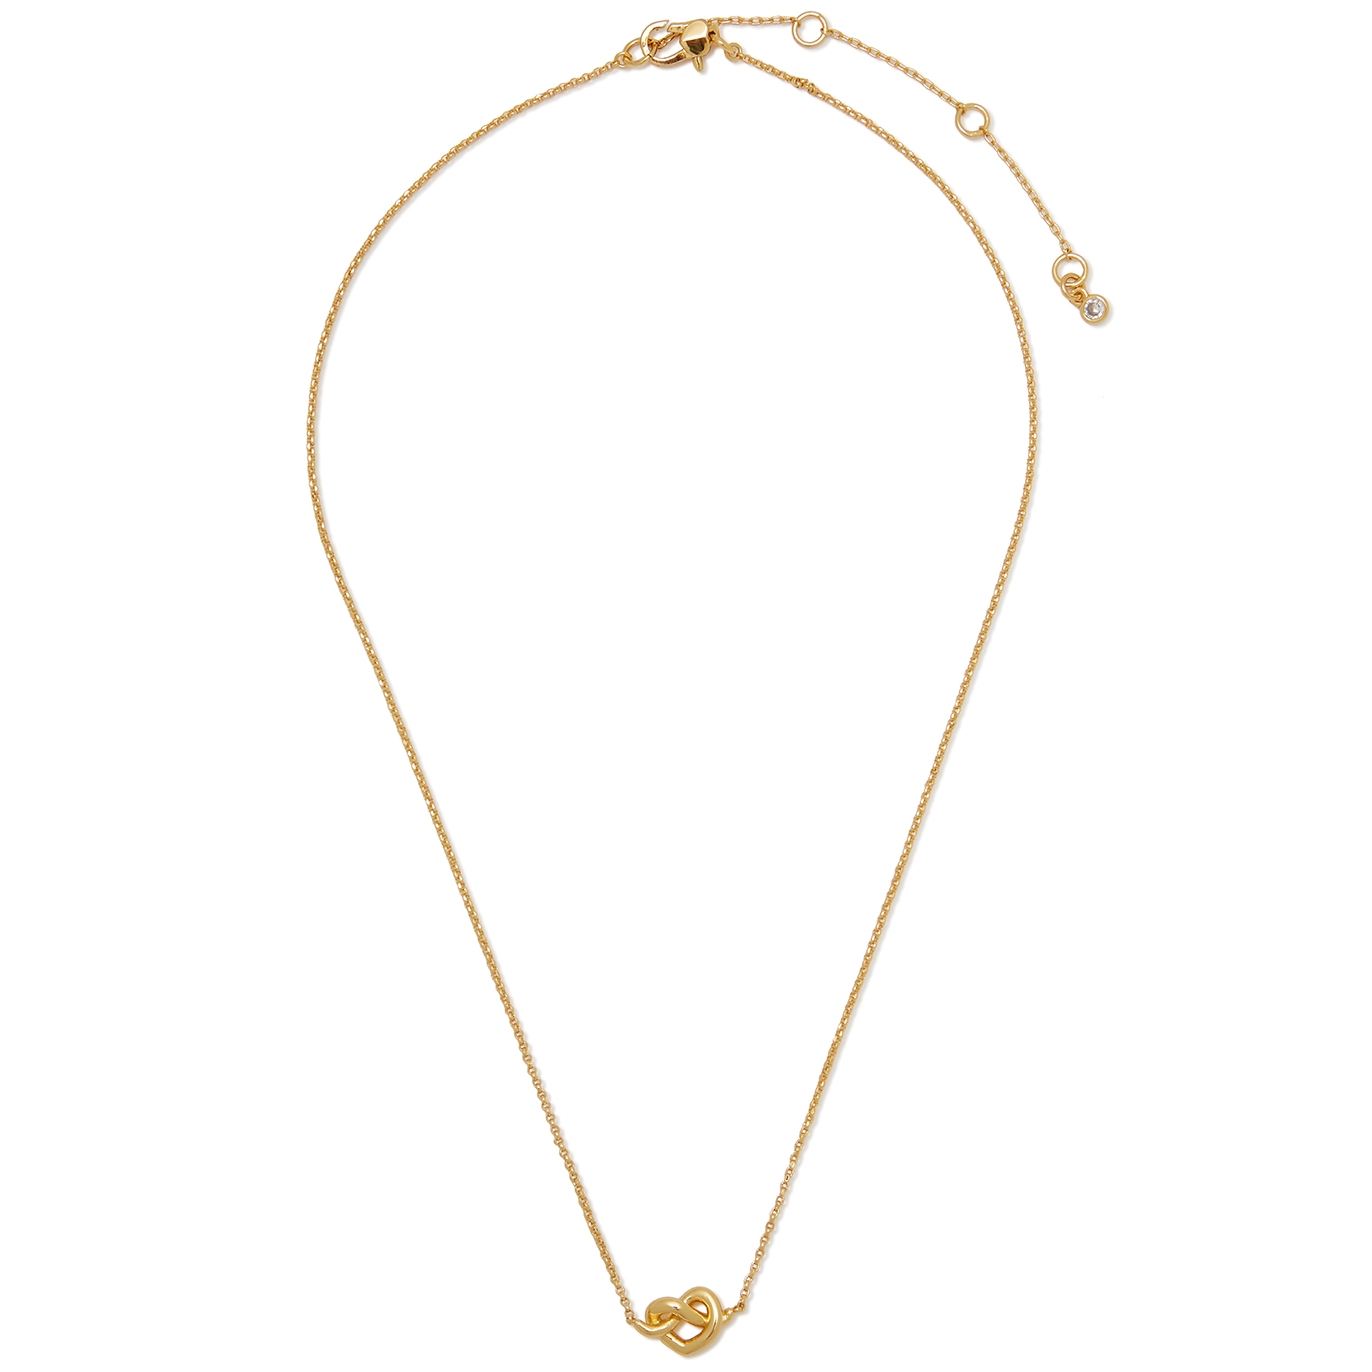 Kate Spade New York Love Me Knot Necklace - Gold - One Size